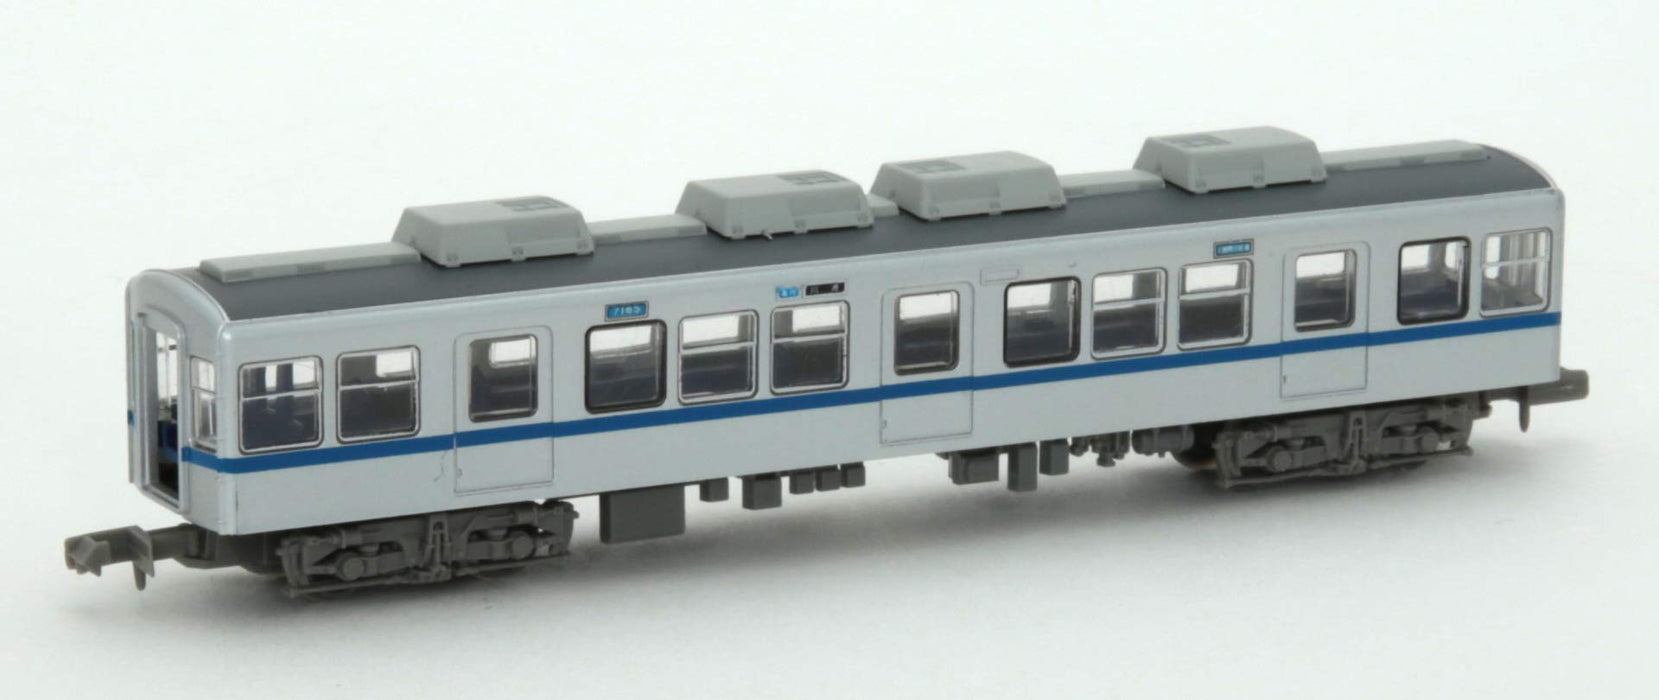 Tomytec Railway Collection Hokuso Type 7150 4-Car Diorama Limited Production